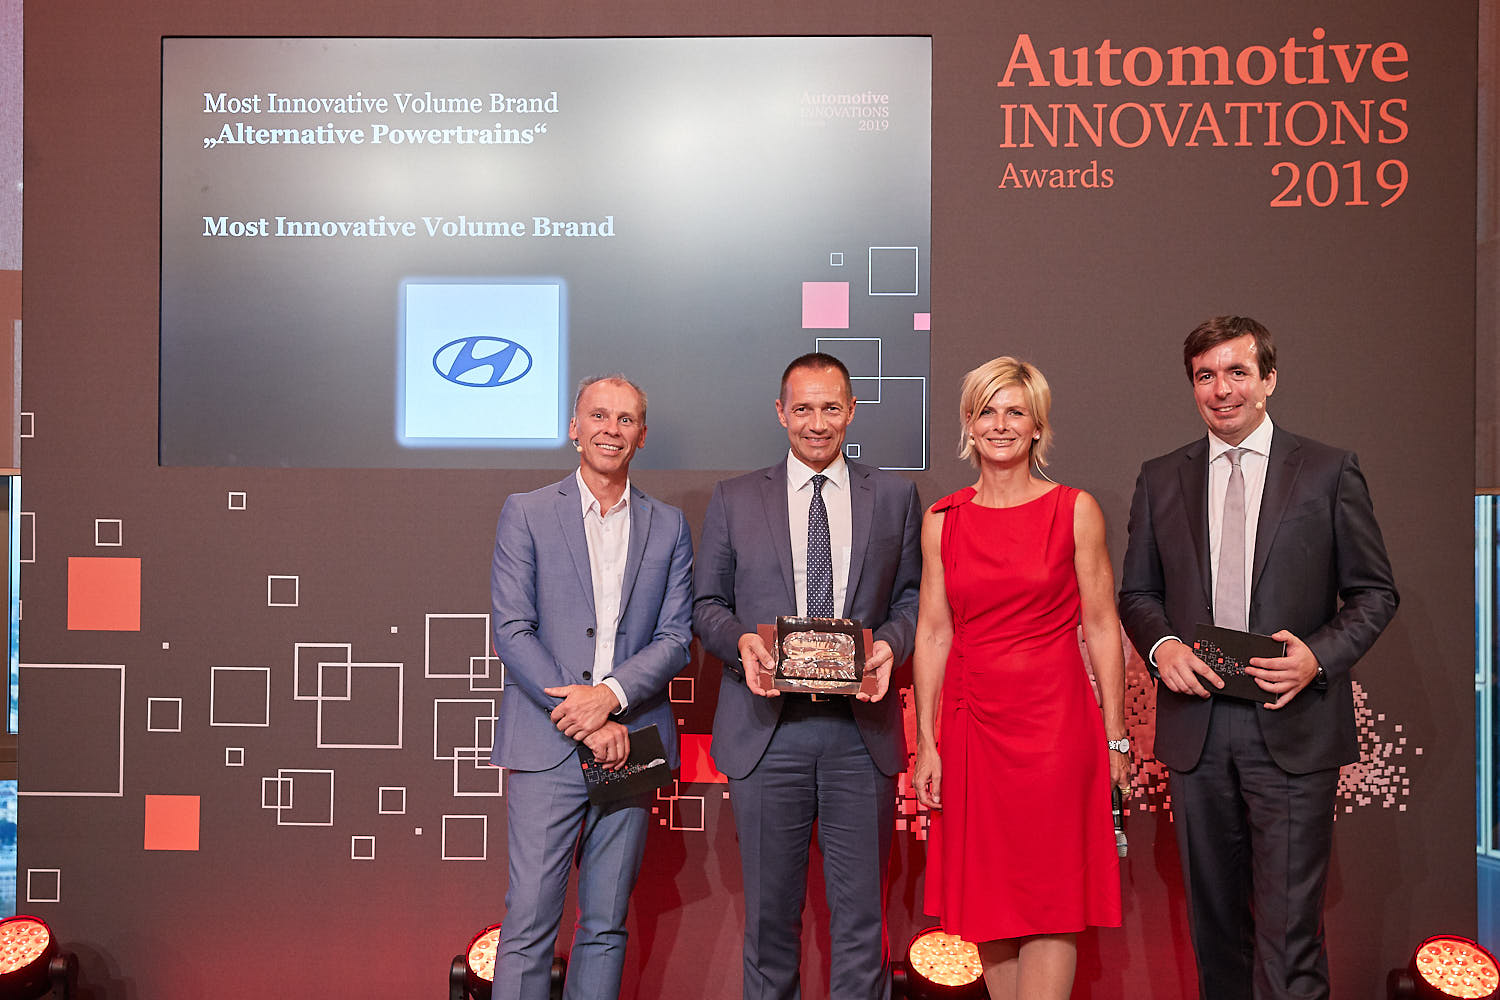 Hyundai Motor Company earns two awards for innovation from Center of